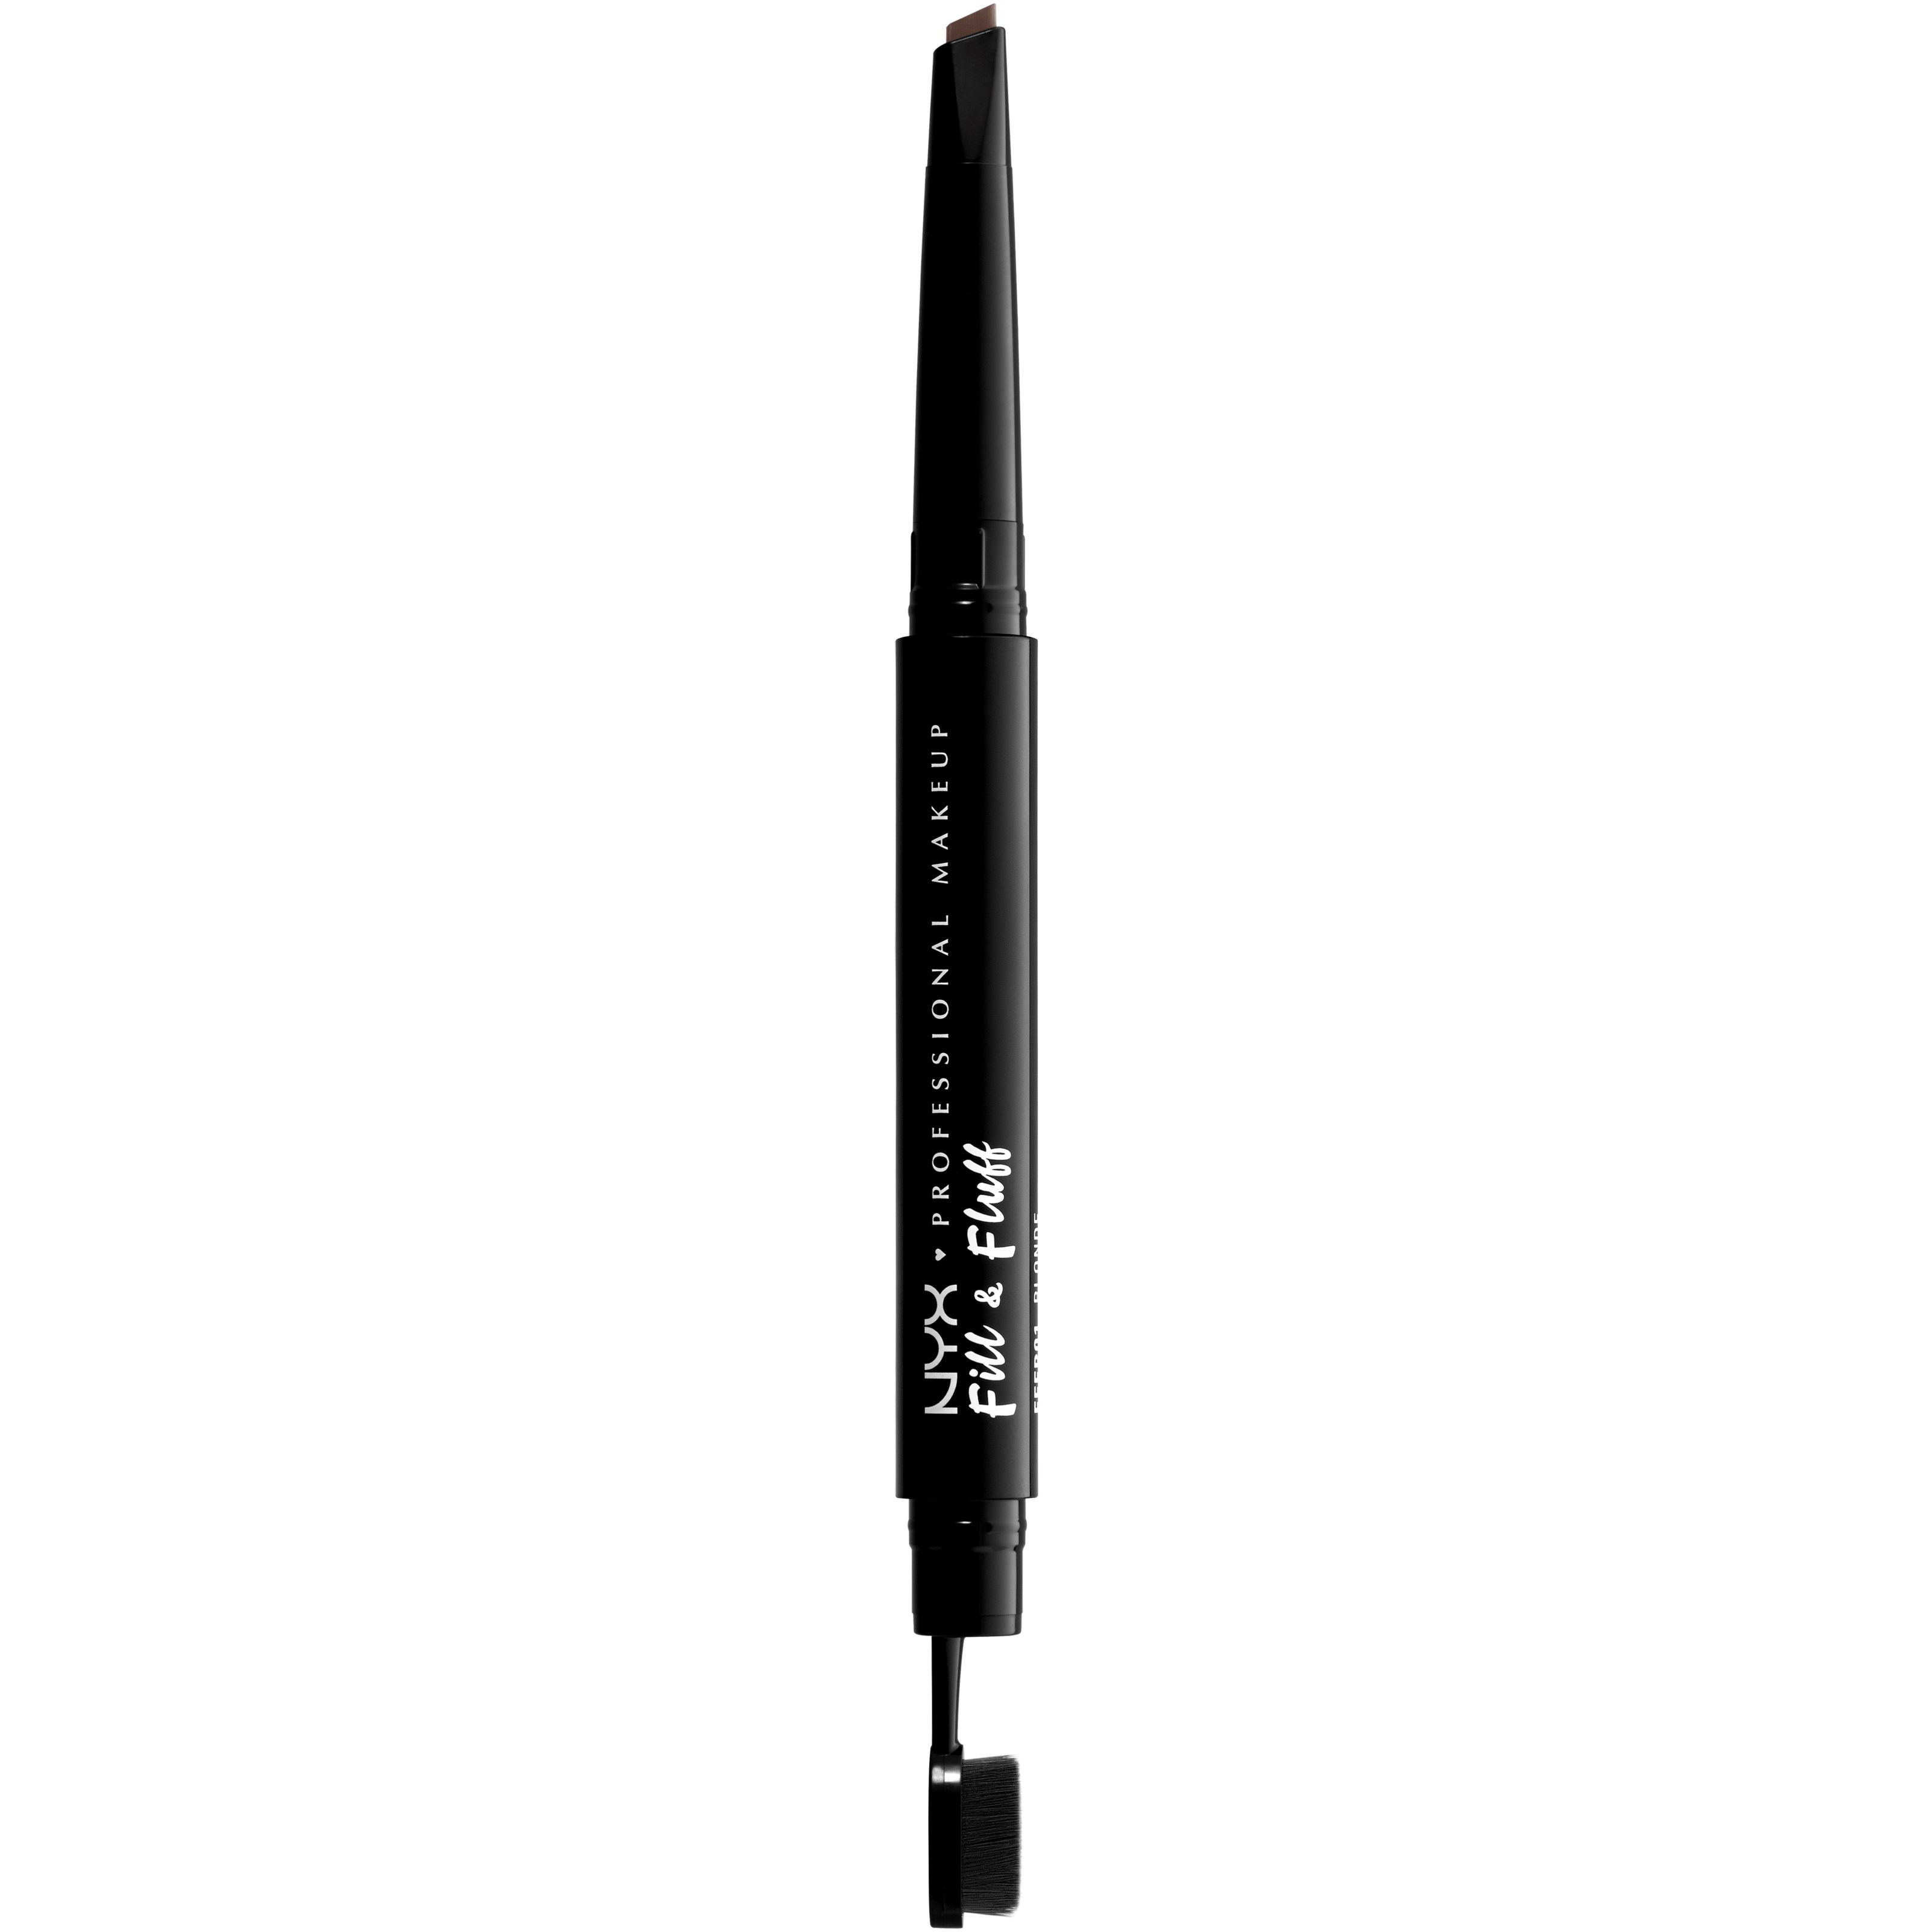 NYX PROFESSIONAL MAKEUP Fill & Fluff Eyebrow Pomade Pencil Chocolate